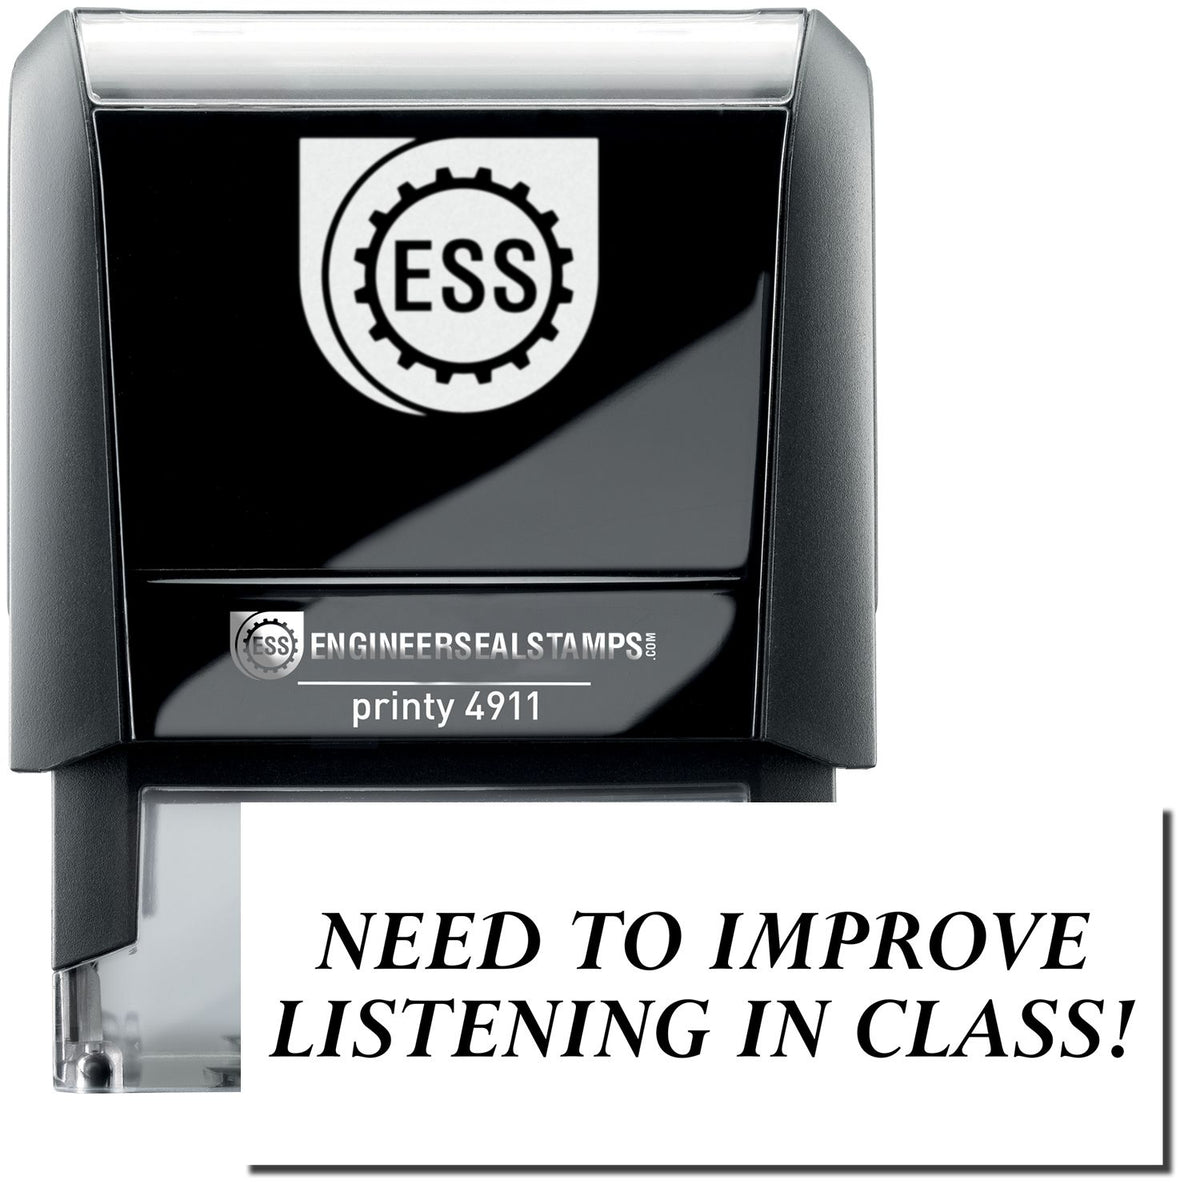 A self-inking stamp with a stamped image showing how the text &quot;NEED TO IMPROVE LISTENING IN CLASS!&quot; is displayed after stamping.